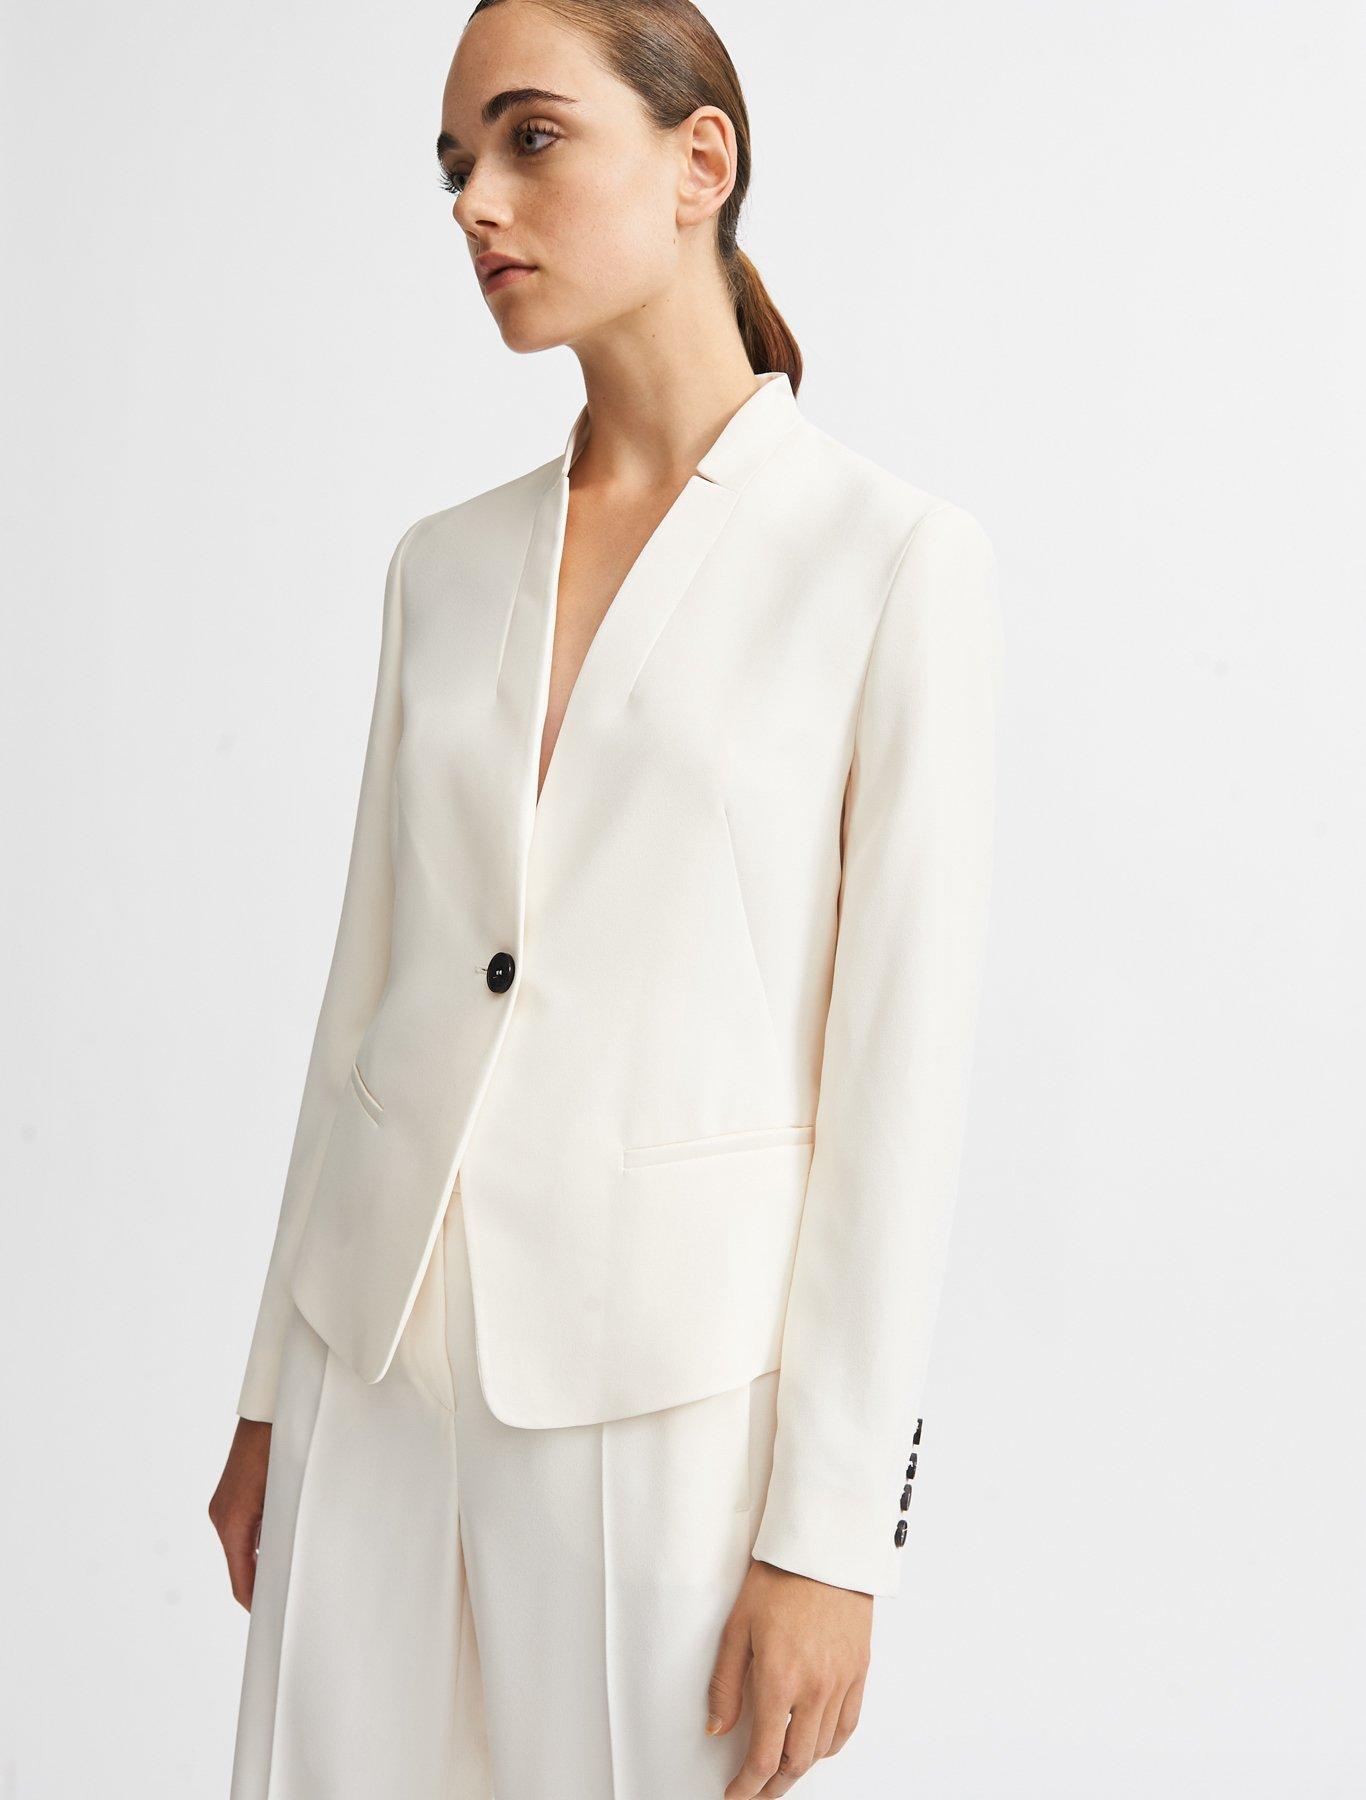 35 of the Best Bridal Jackets for 2022 - hitched.co.uk